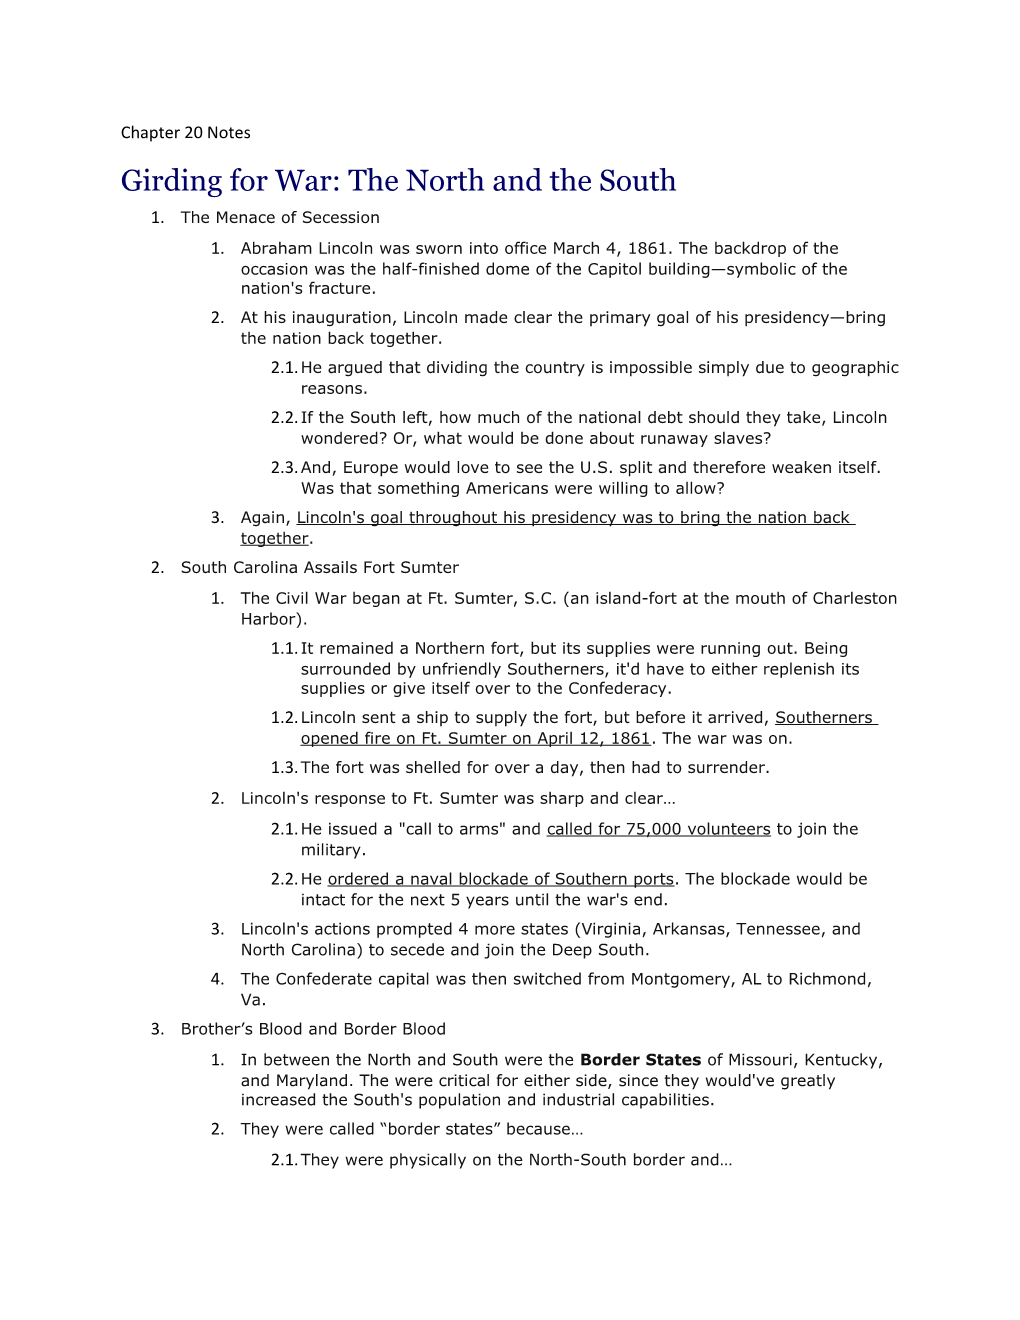 Girding for War: the North and the South